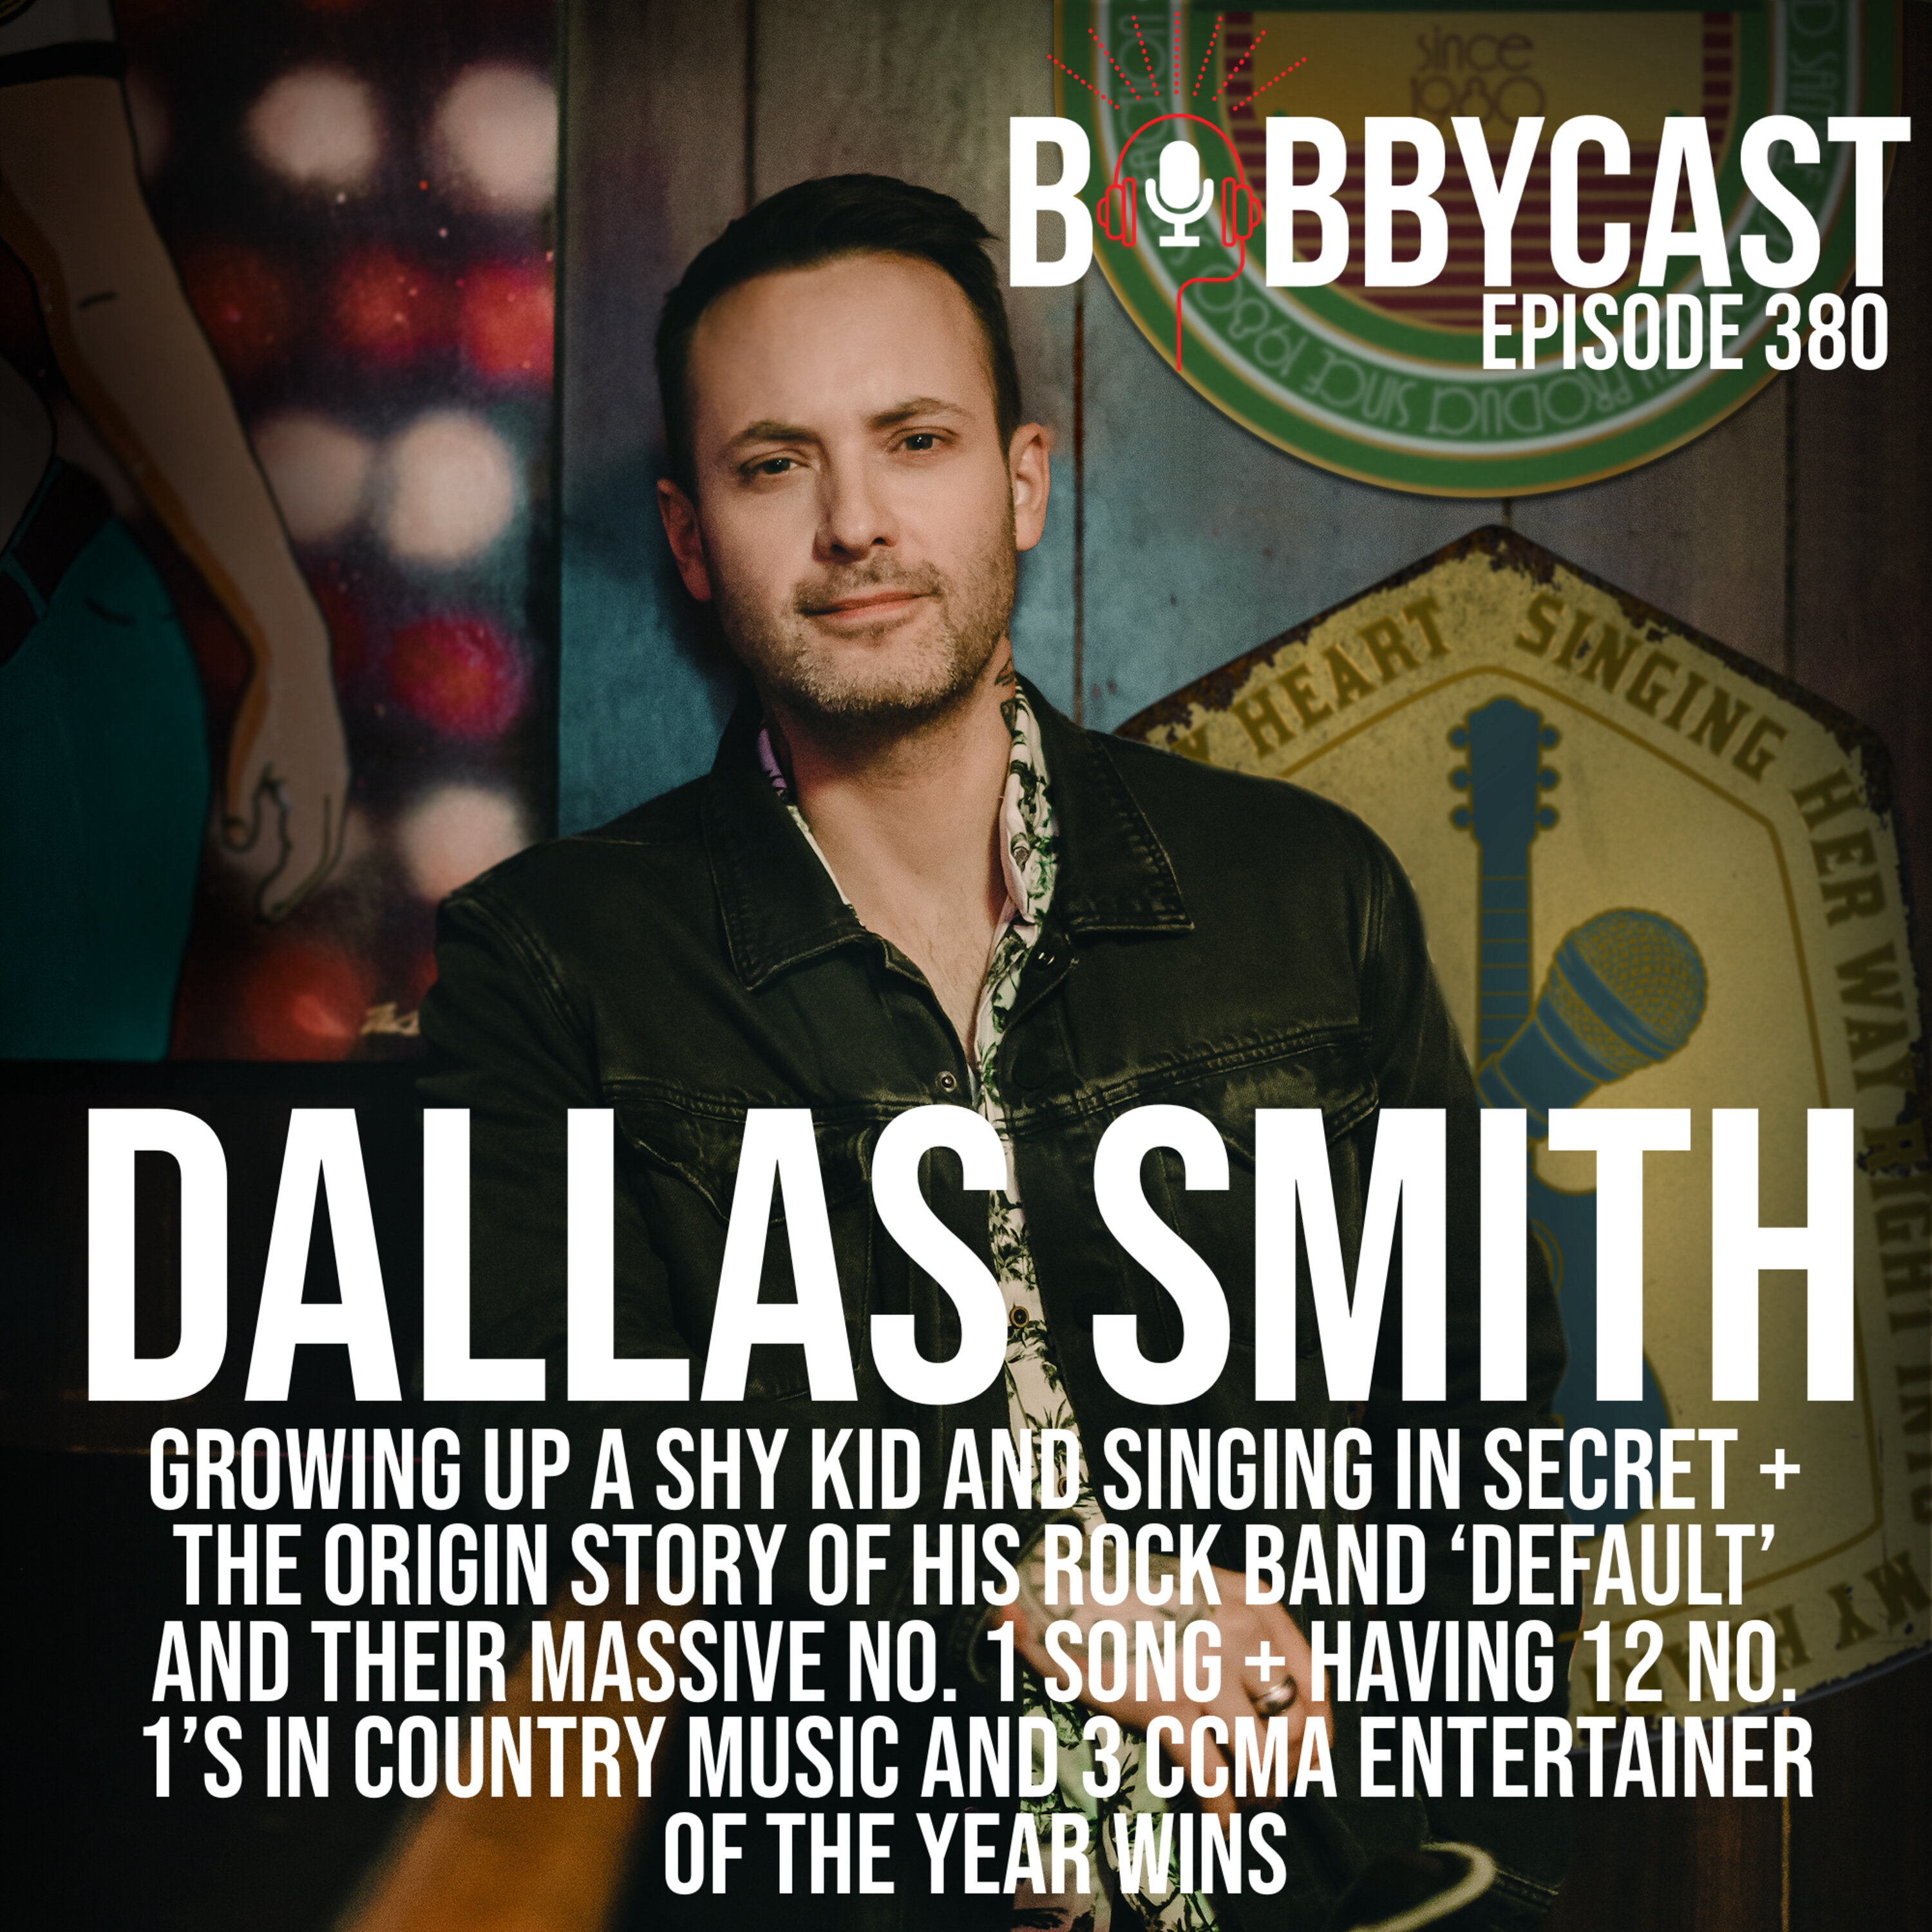 #380 - Dallas Smith on Growing Up A Shy Kid And Singing in Secret + The Origin Story of His Rock Band ‘Default’ and Their Massive No. 1 Song + Having 12 No. 1’s in Country Music and 3 CCMA Entertainer of the Year Wins + What It’s Like to Be ‘Canadian’ Famous!